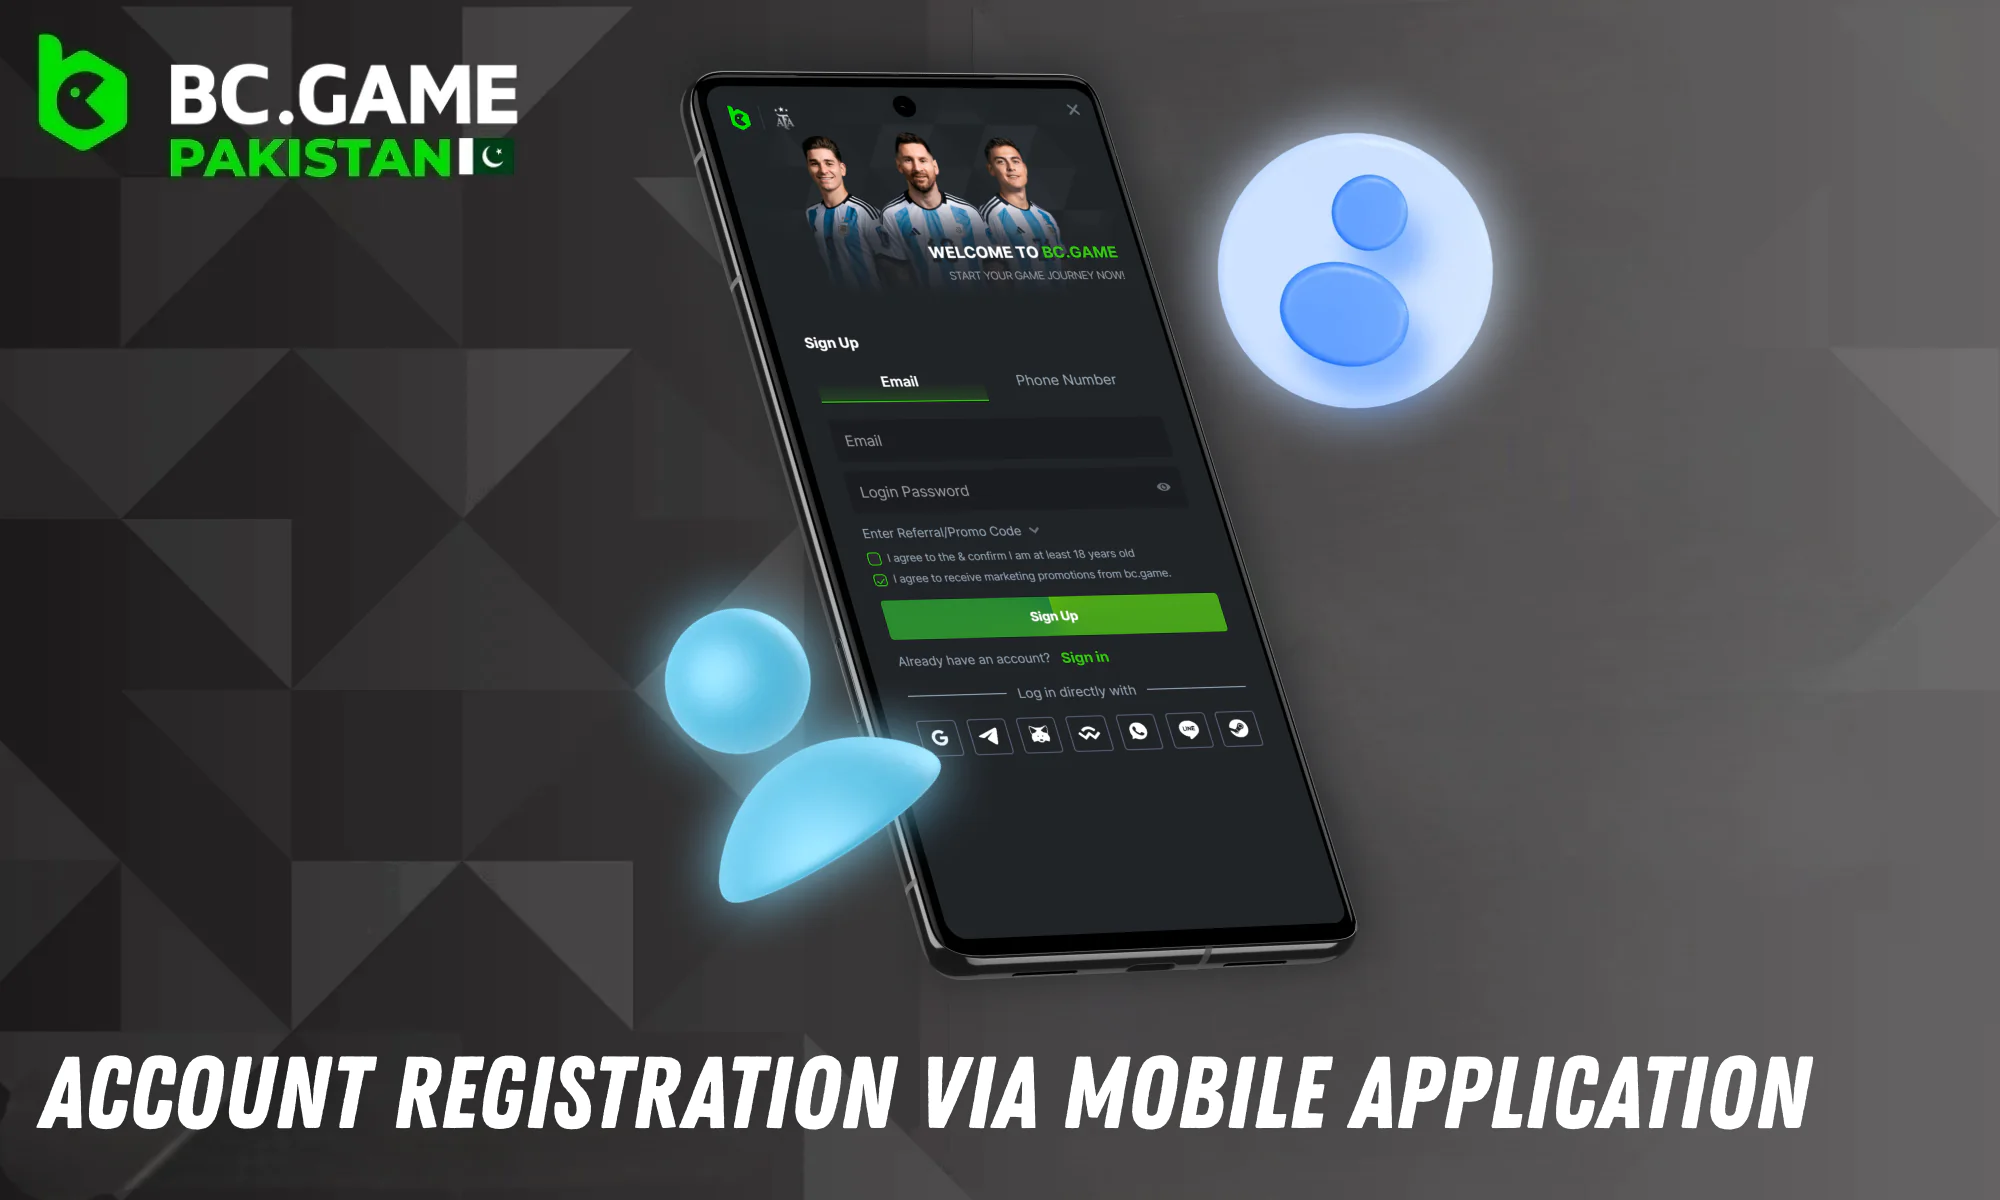 Register for an account conveniently using the BC Game mobile application